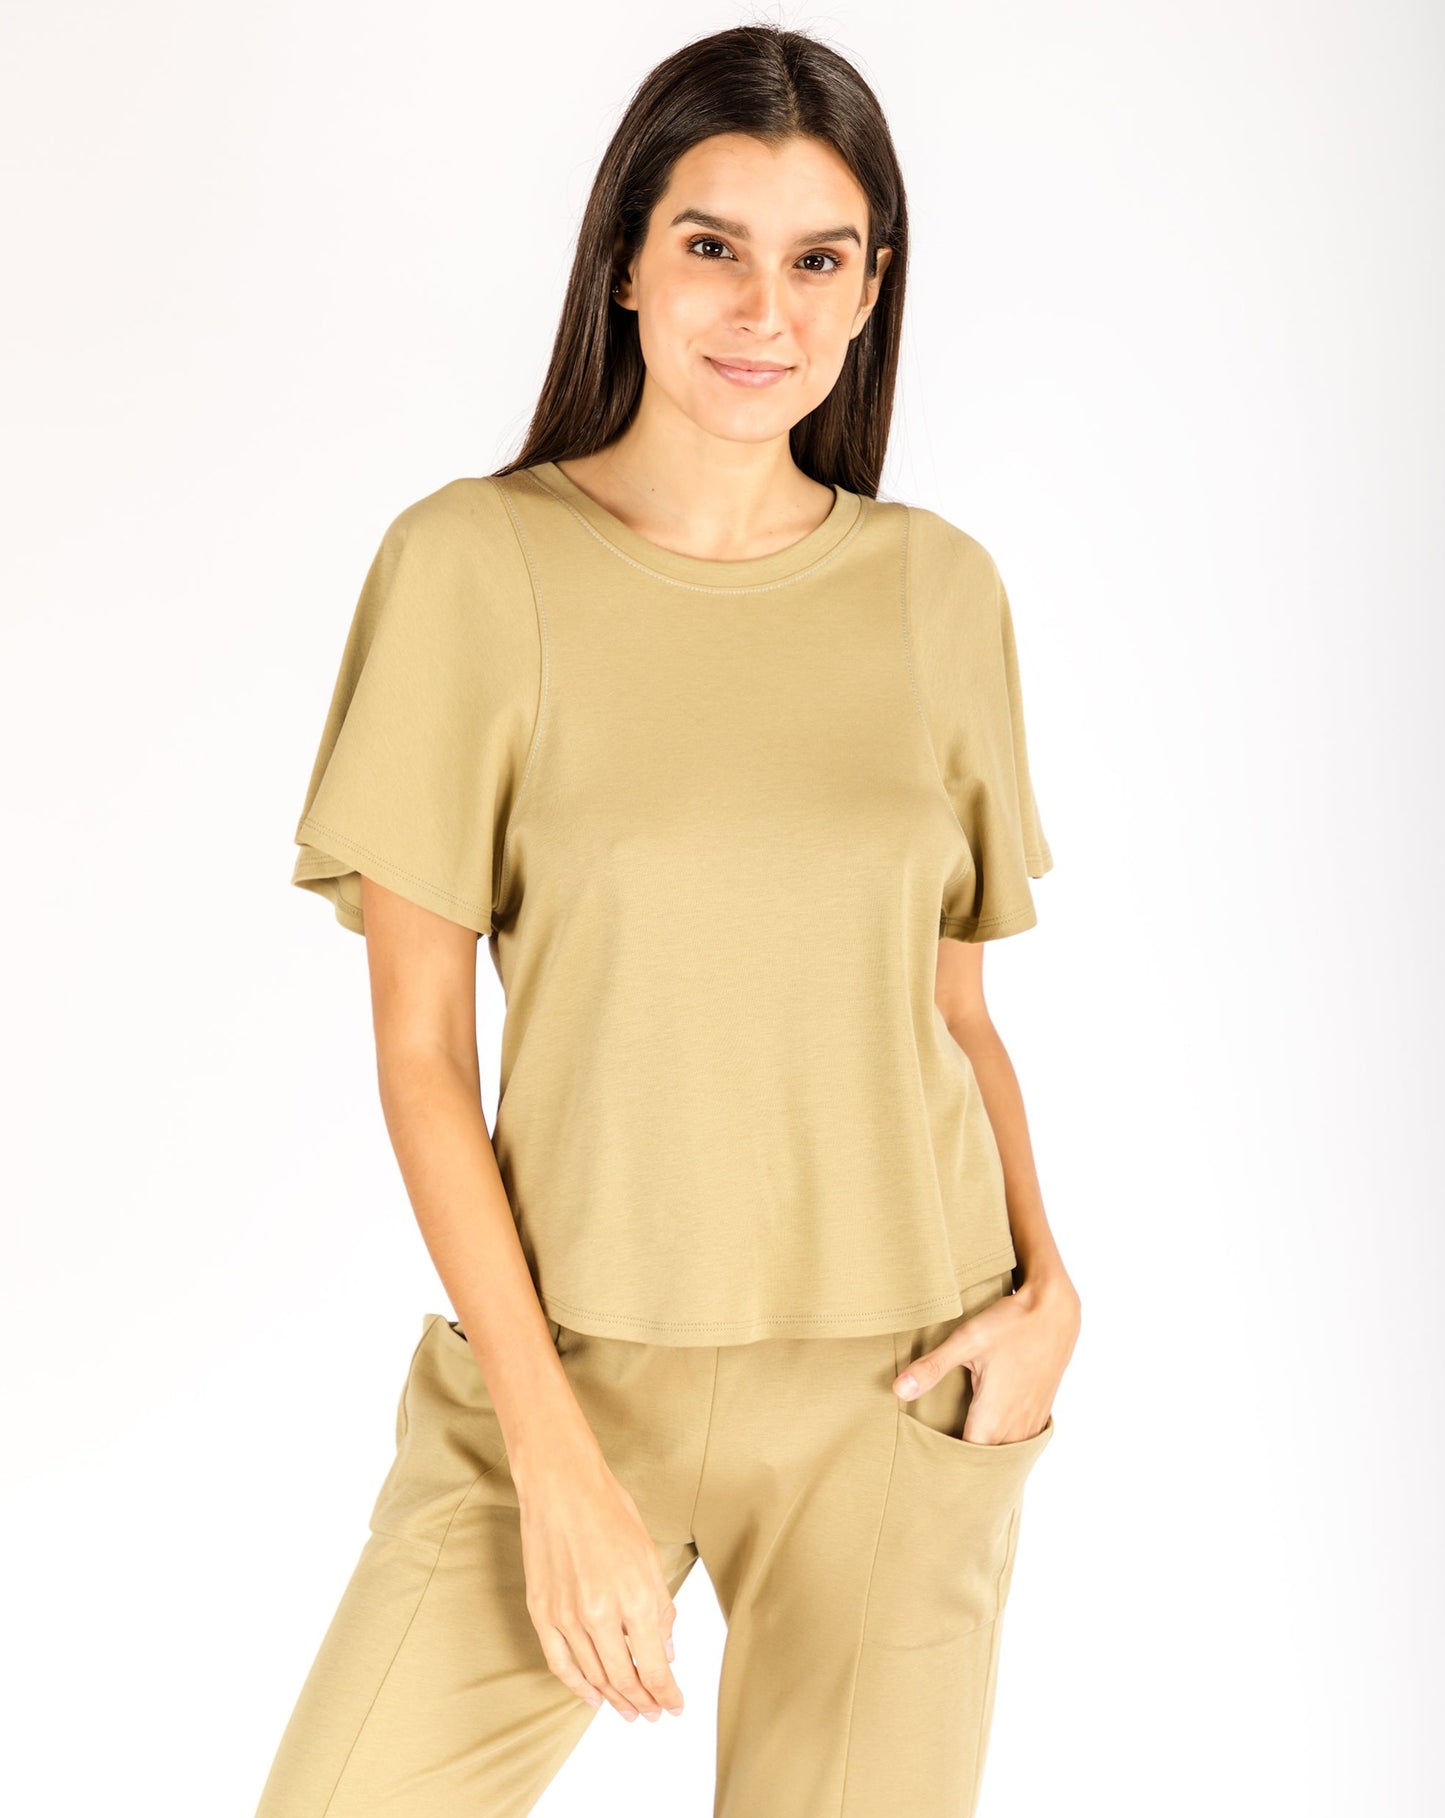 women_s-pajama-set-top-with-oversized-sleeves-olive-Lavender-Dreams-1